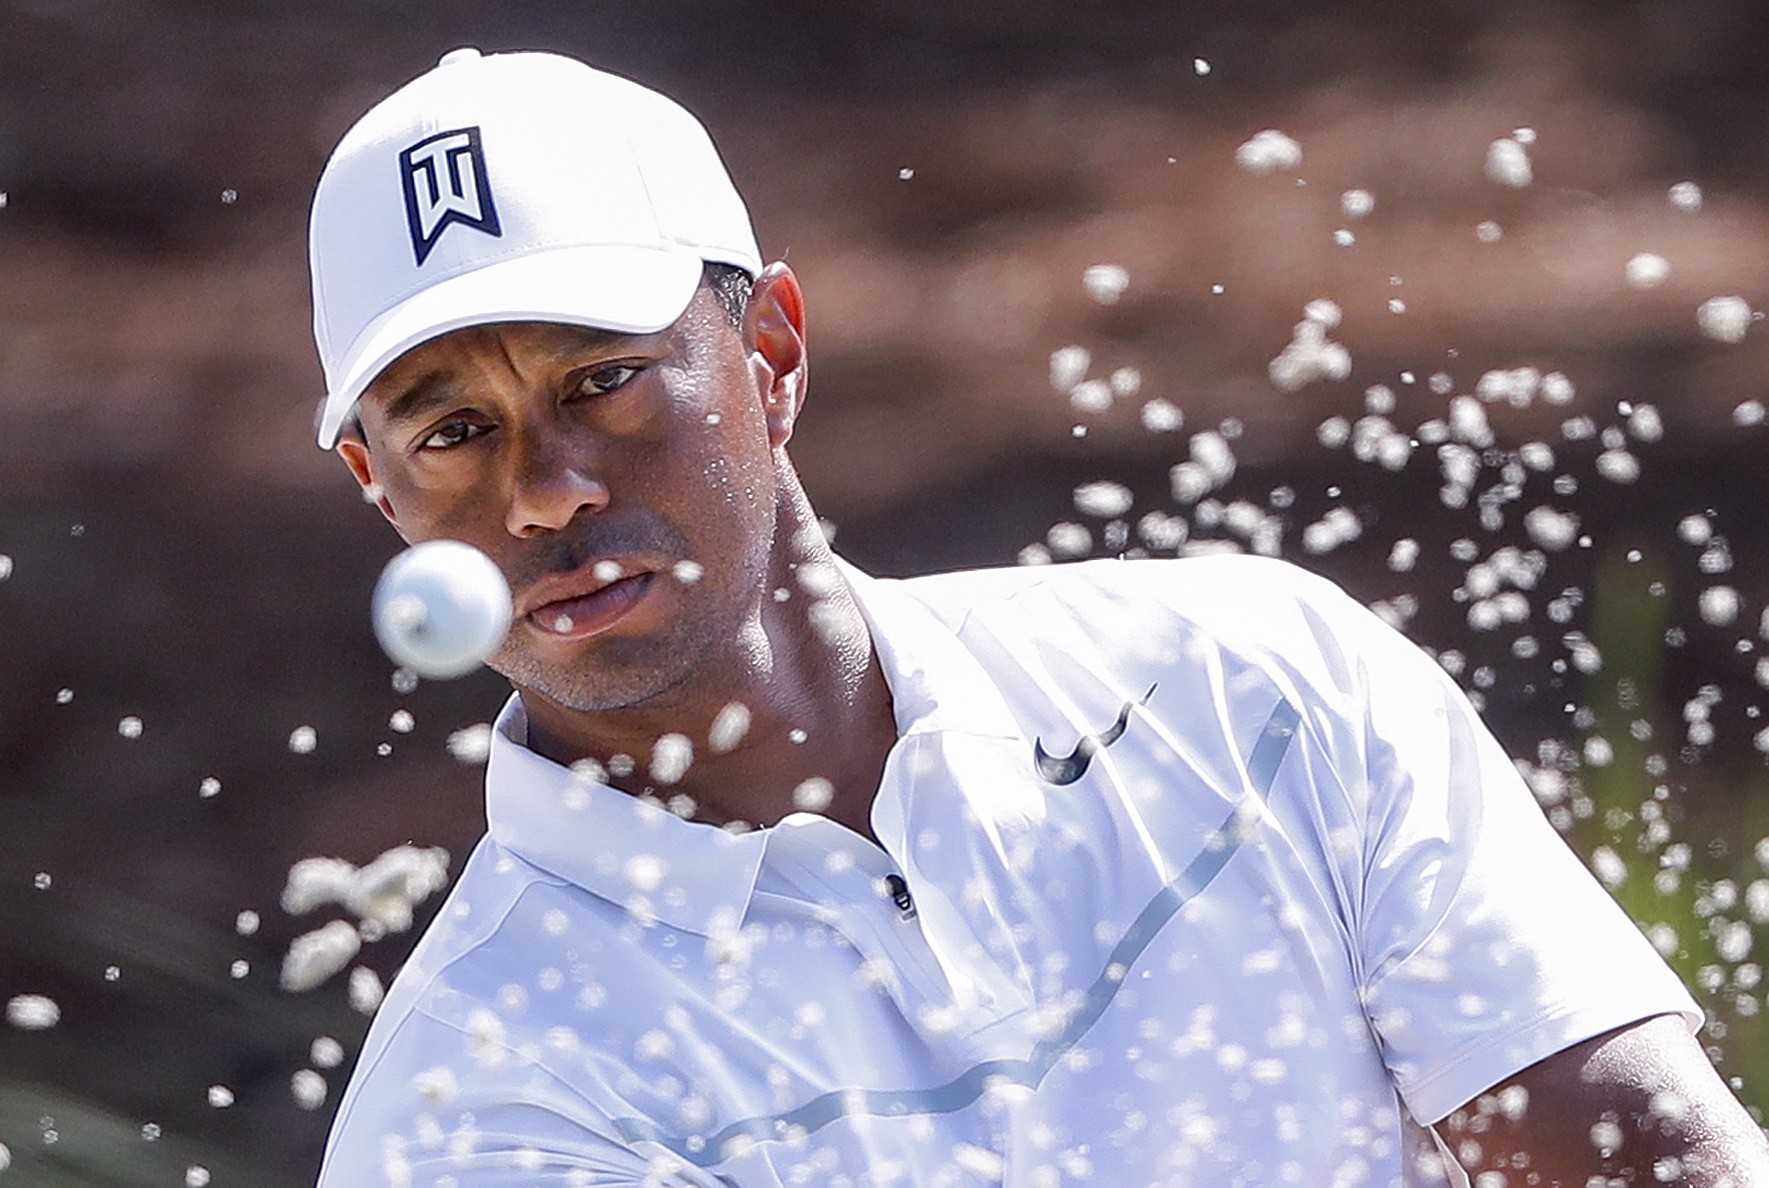 Tiger Woods was pleased to announce that he will compete at The Open Championship. Photo: EPA